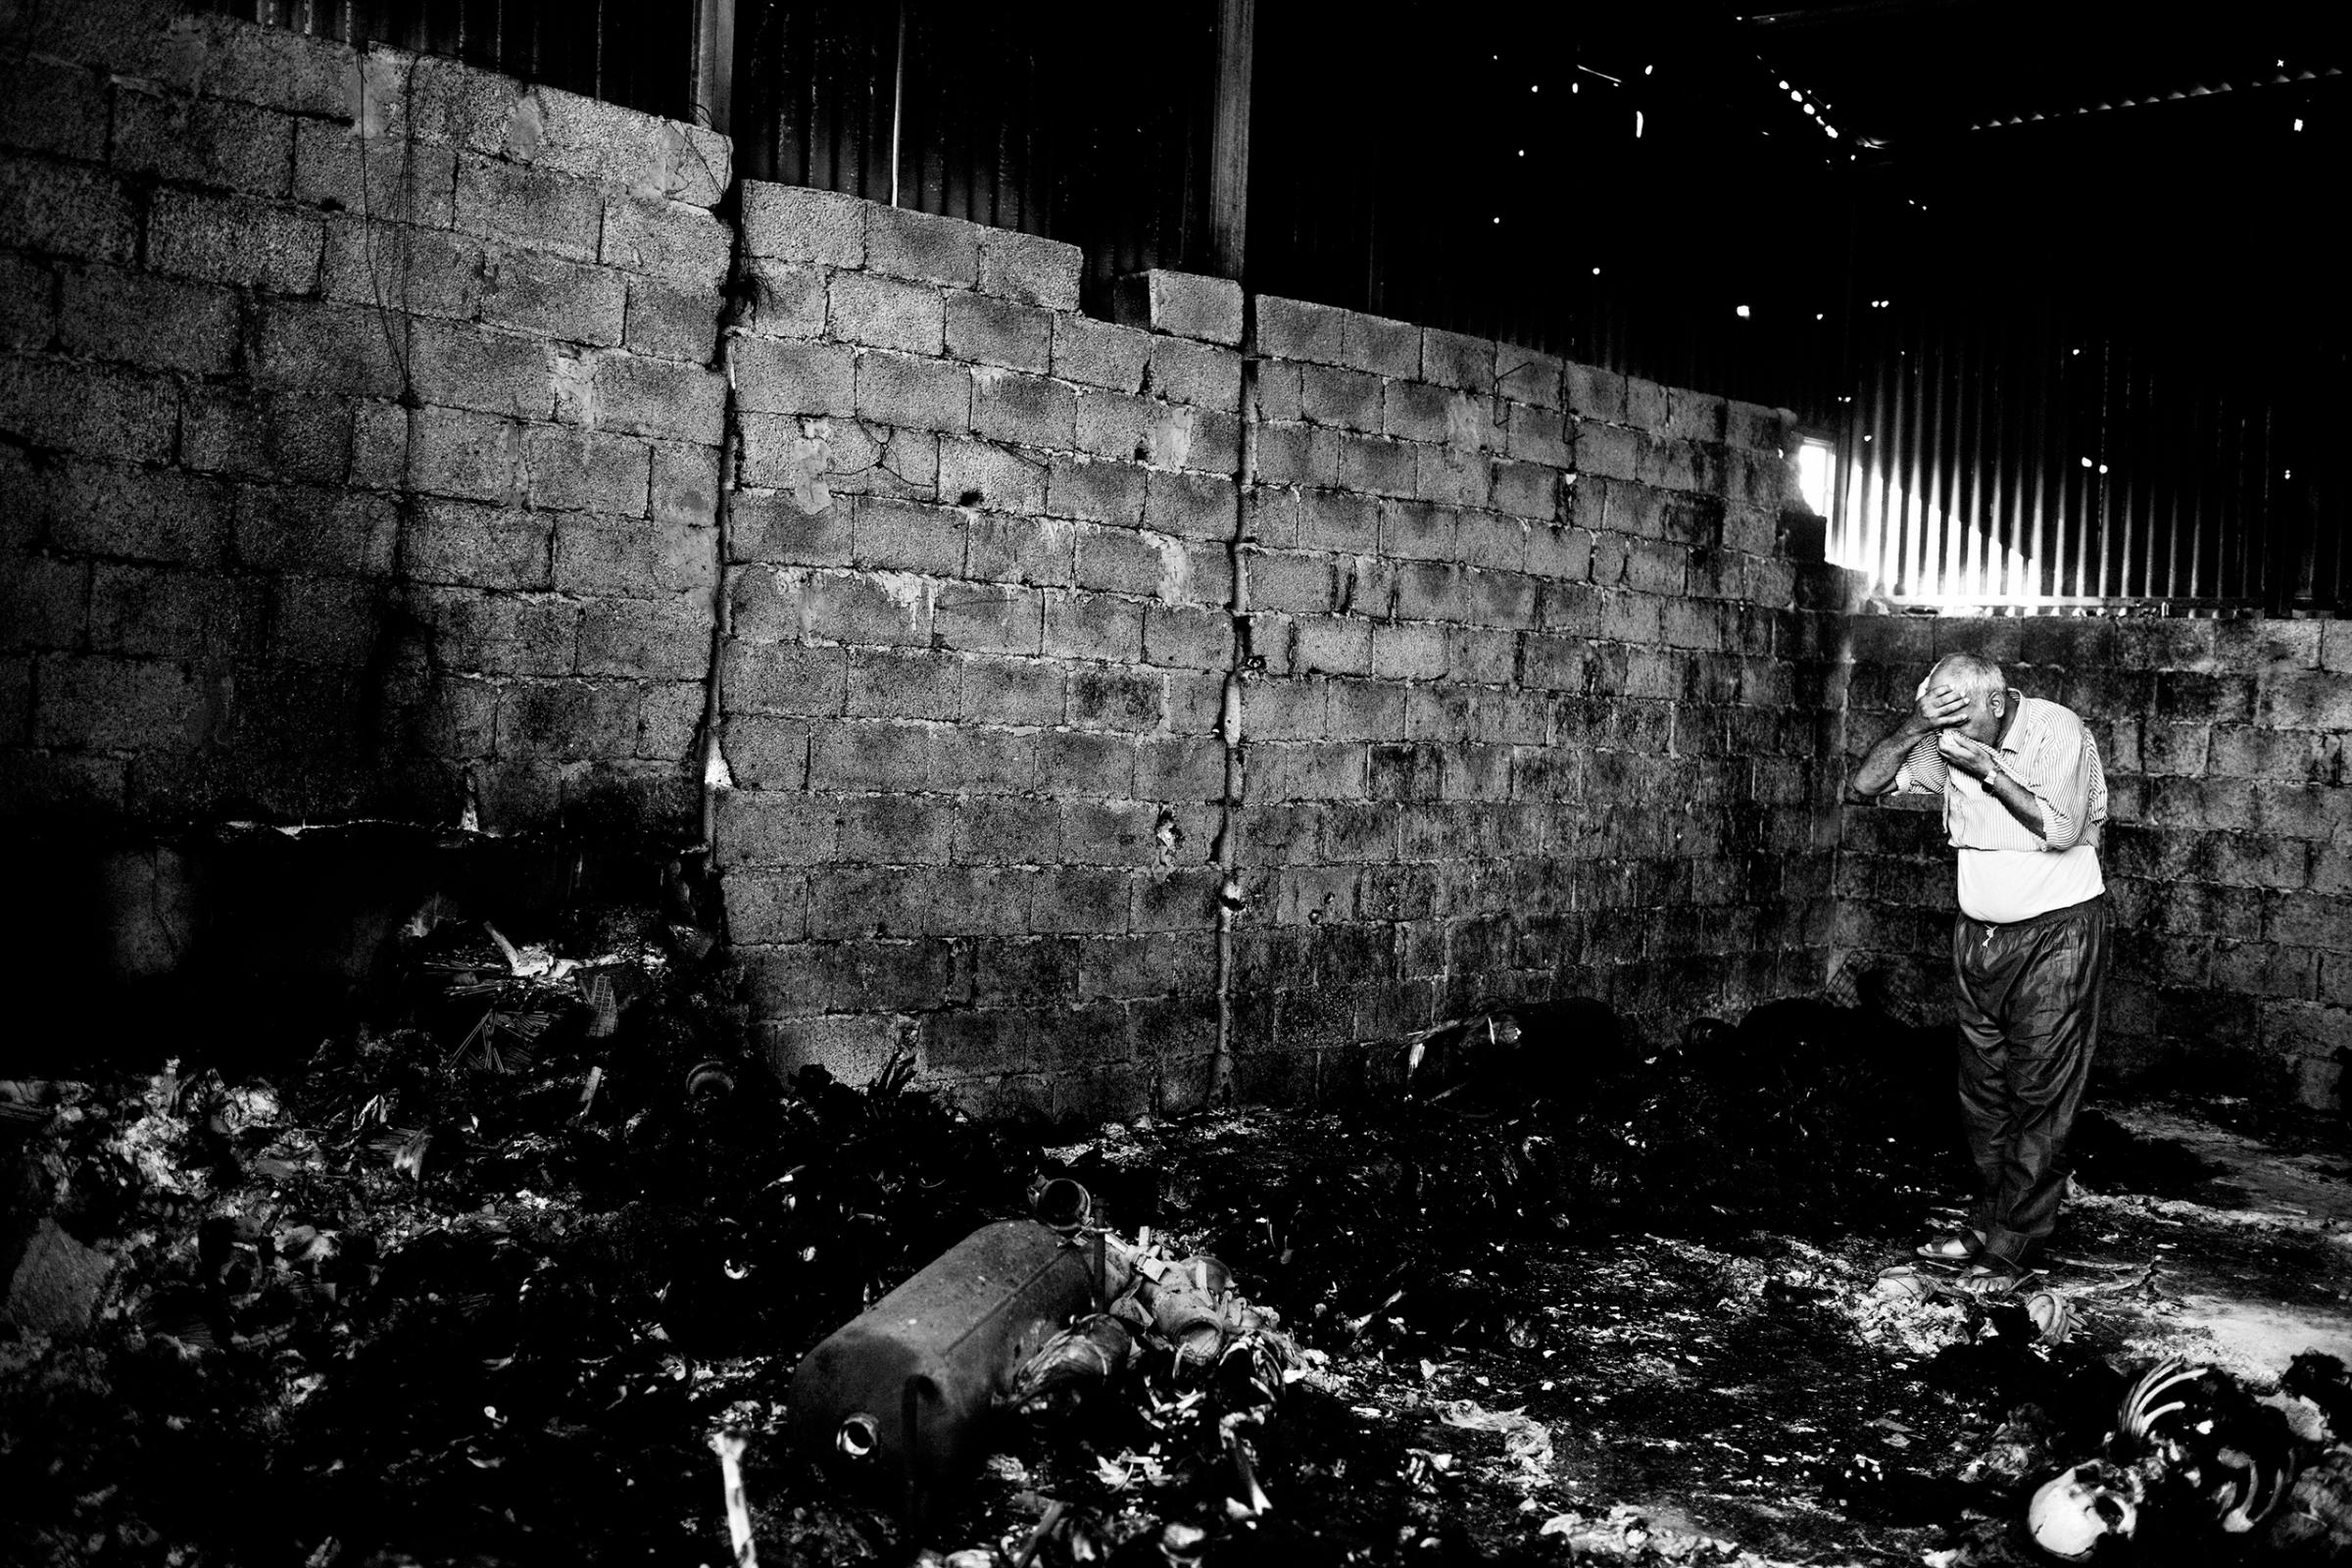 A libyan man despairs himself inside the warehouse which holds the remains of 50 burned bodies. Suburbs of Tripoli, Libya. August 27, 2011.